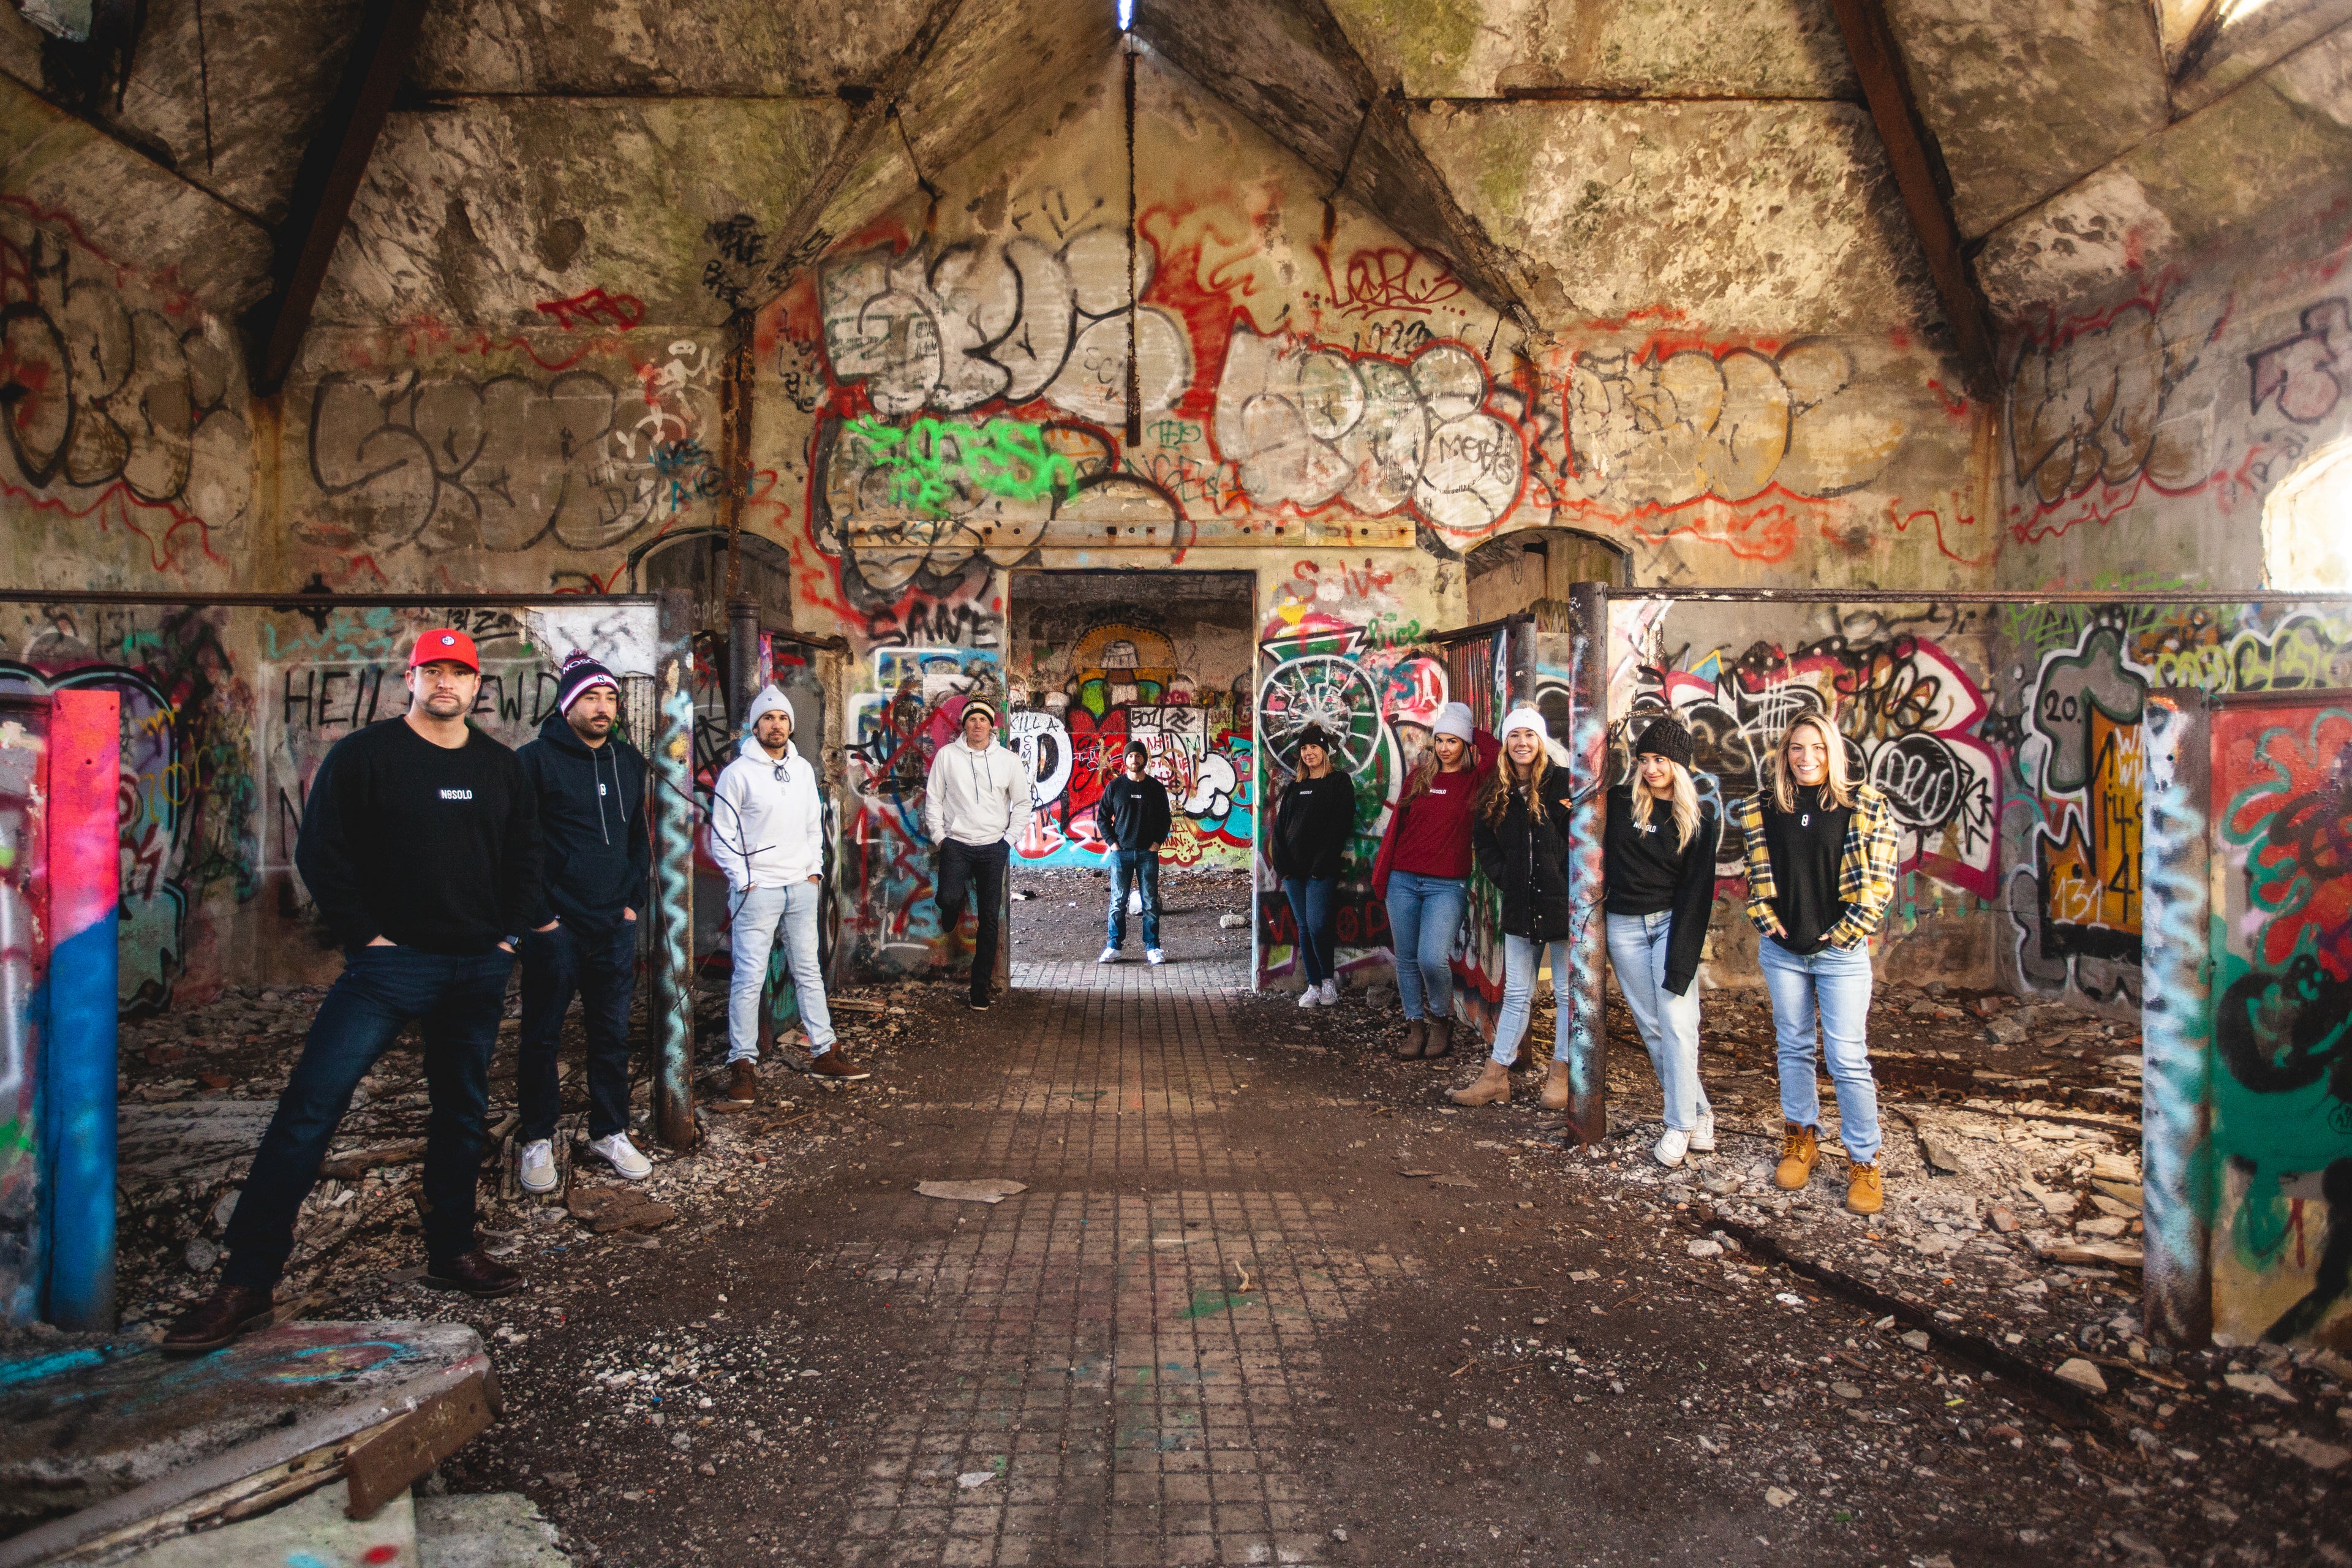 Group of people in graffiti area